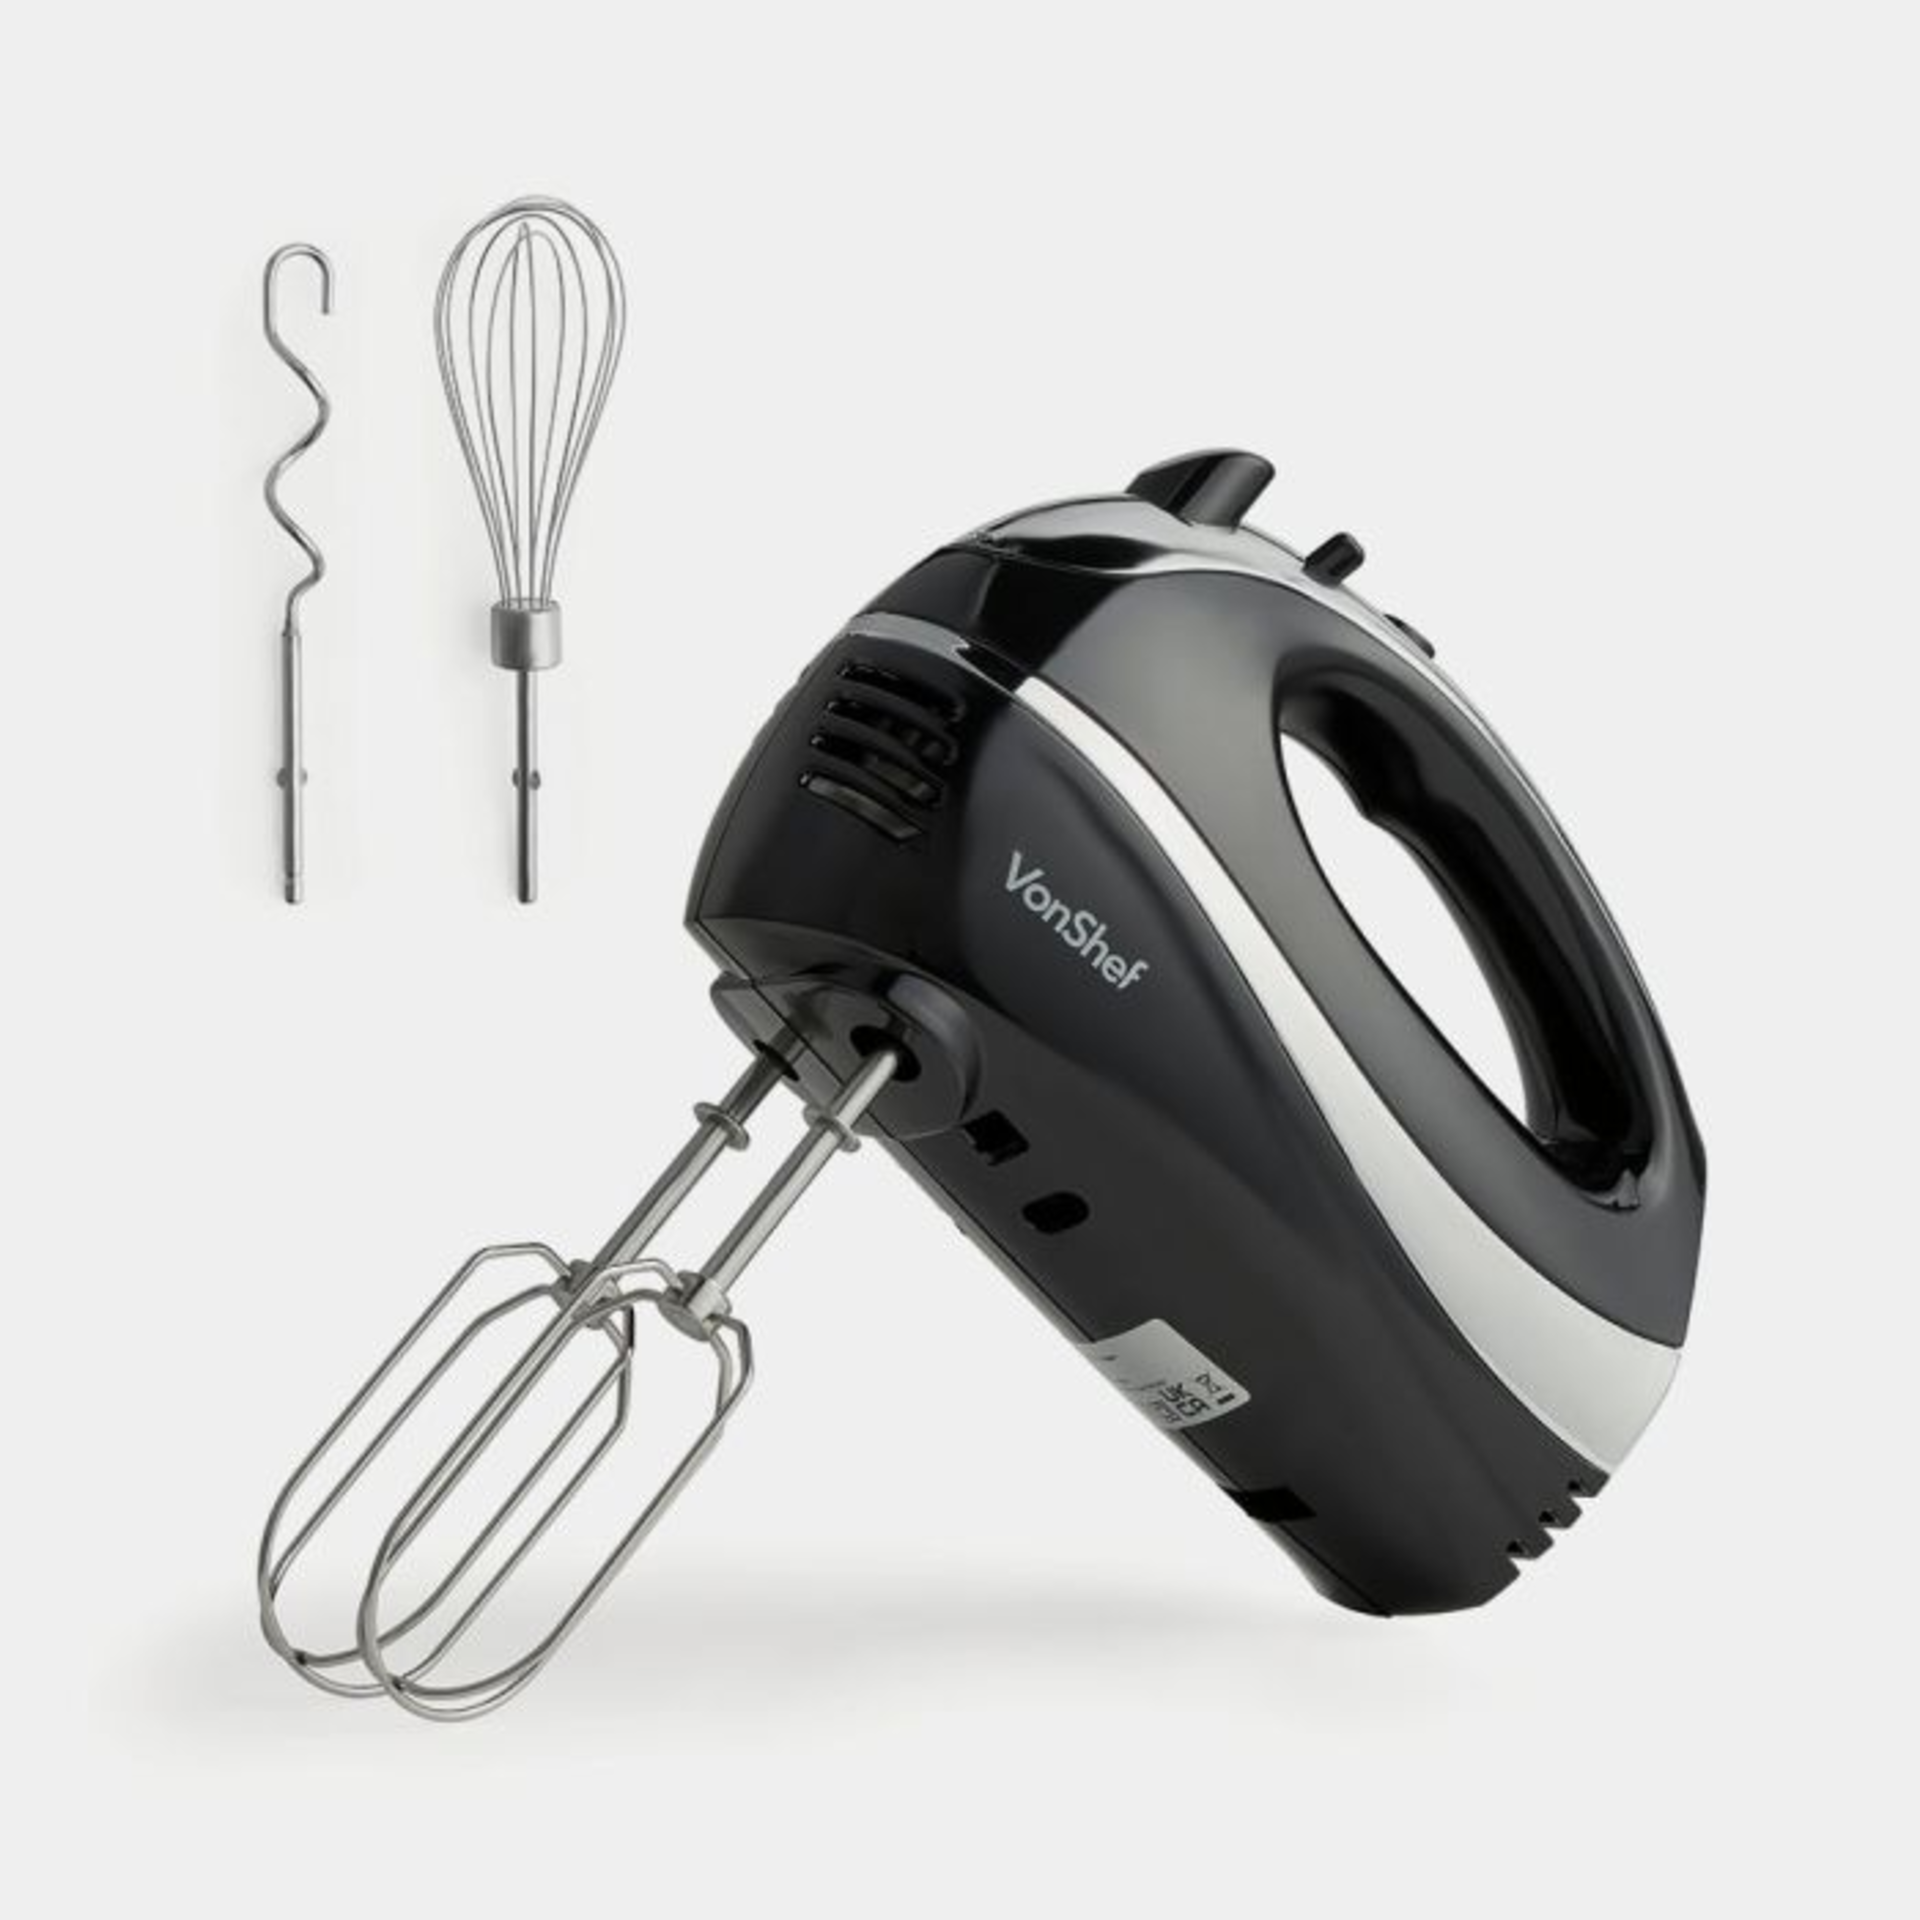 300W Hand Mixer - Black (ER51) This is the ultimate kitchen appliance if you love baking and